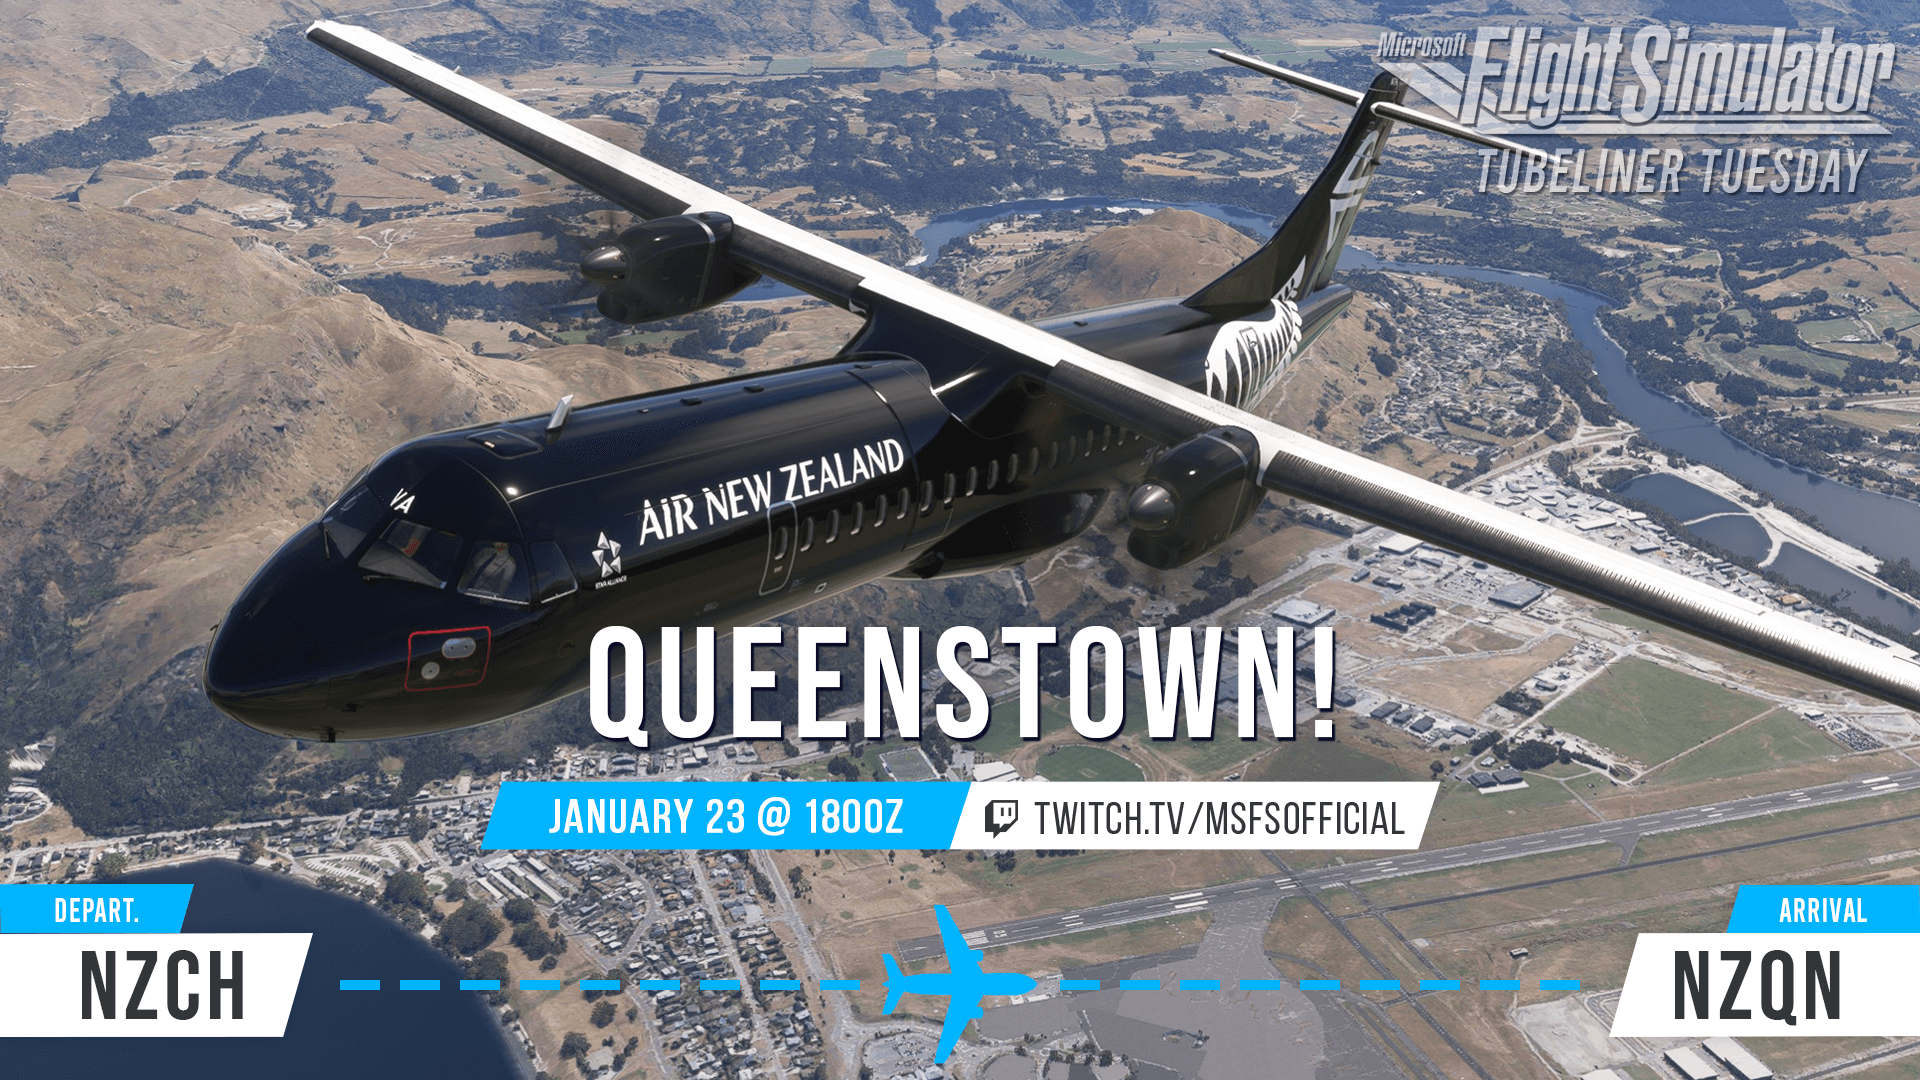 Tubeliner Tuesday: Queenstown. January 23, 1800 UTC. twitch.tv/msfsofficial